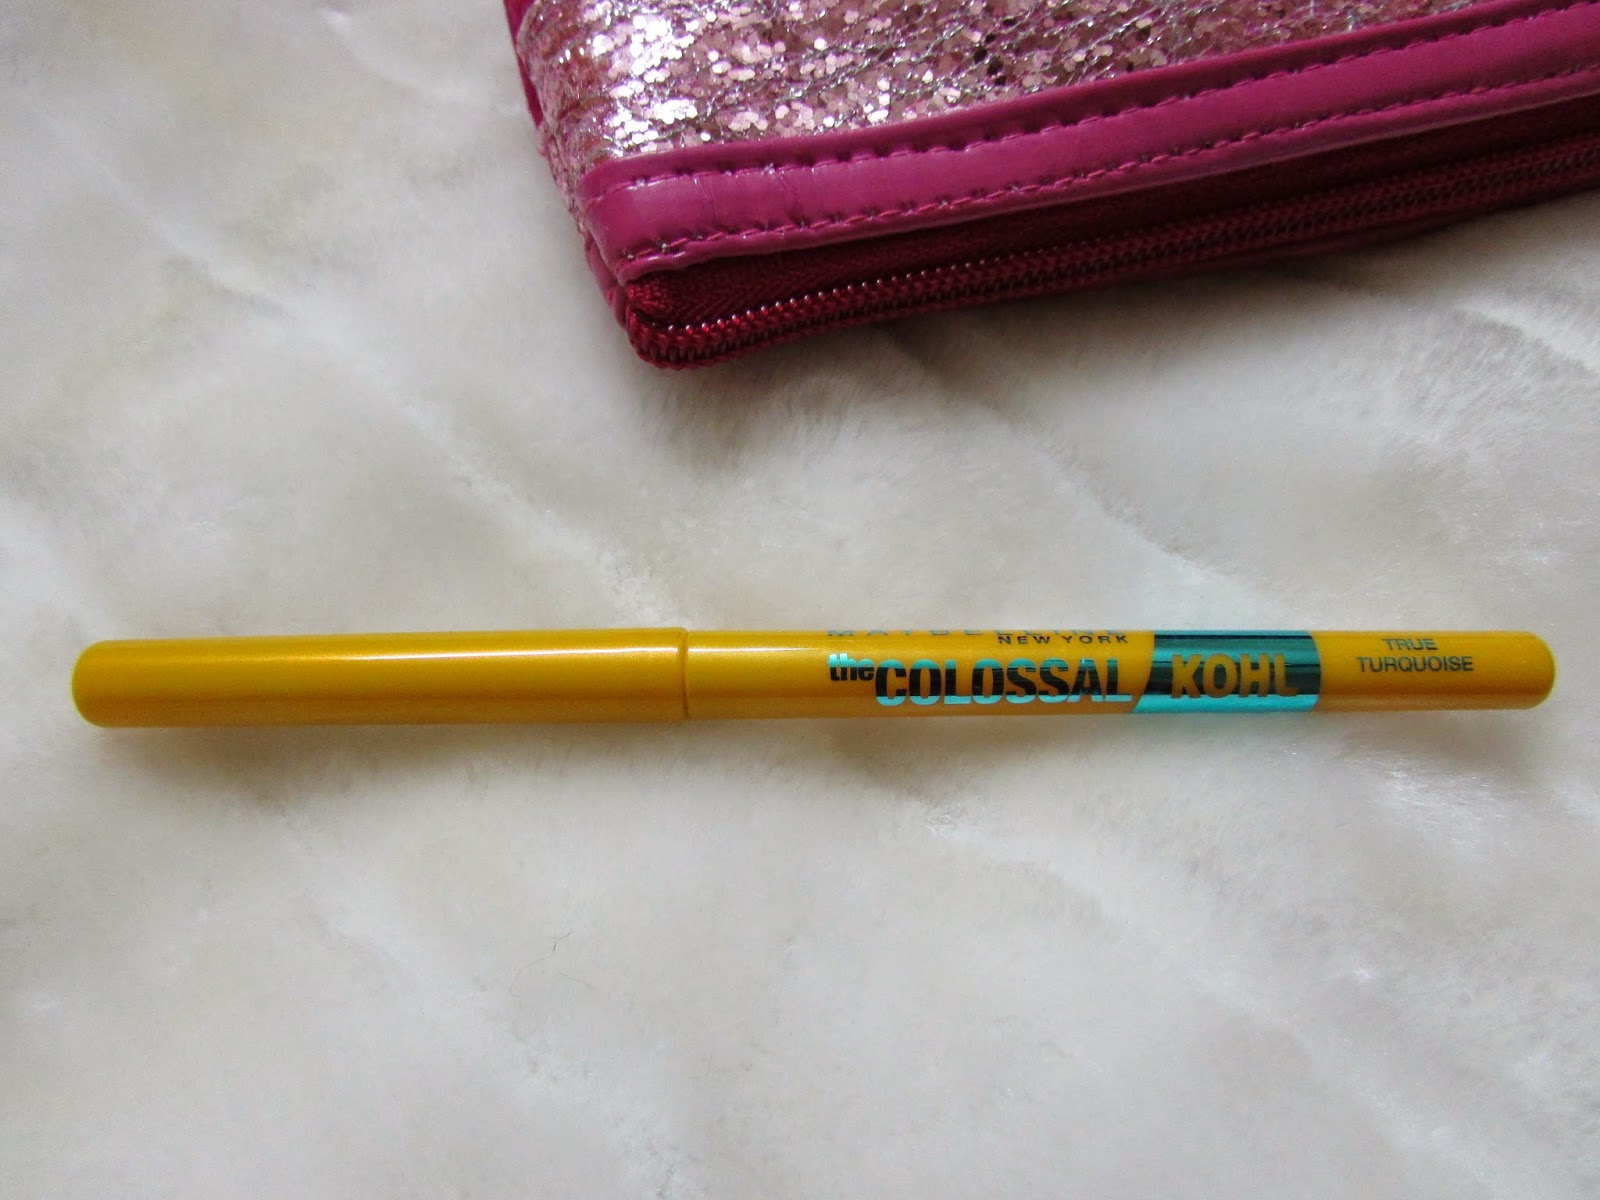 Maybelline Colossal True Turquoise Kohl Review, Maybelline Colossal True Turquoise Kohl  price india, how to wear blue eyeliner, best blue eyeliner, best eyeliner for summers, maybelline colored eyeliner, colored eyeliner india, Maybelline Turquoise kajal, how to wear Turquoise kajal, beauty , fashion,beauty and fashion,beauty blog, fashion blog , indian beauty blog,indian fashion blog, beauty and fashion blog, indian beauty and fashion blog, indian bloggers, indian beauty bloggers, indian fashion bloggers,indian bloggers online, top 10 indian bloggers, top indian bloggers,top 10 fashion bloggers, indian bloggers on blogspot,home remedies, how to 